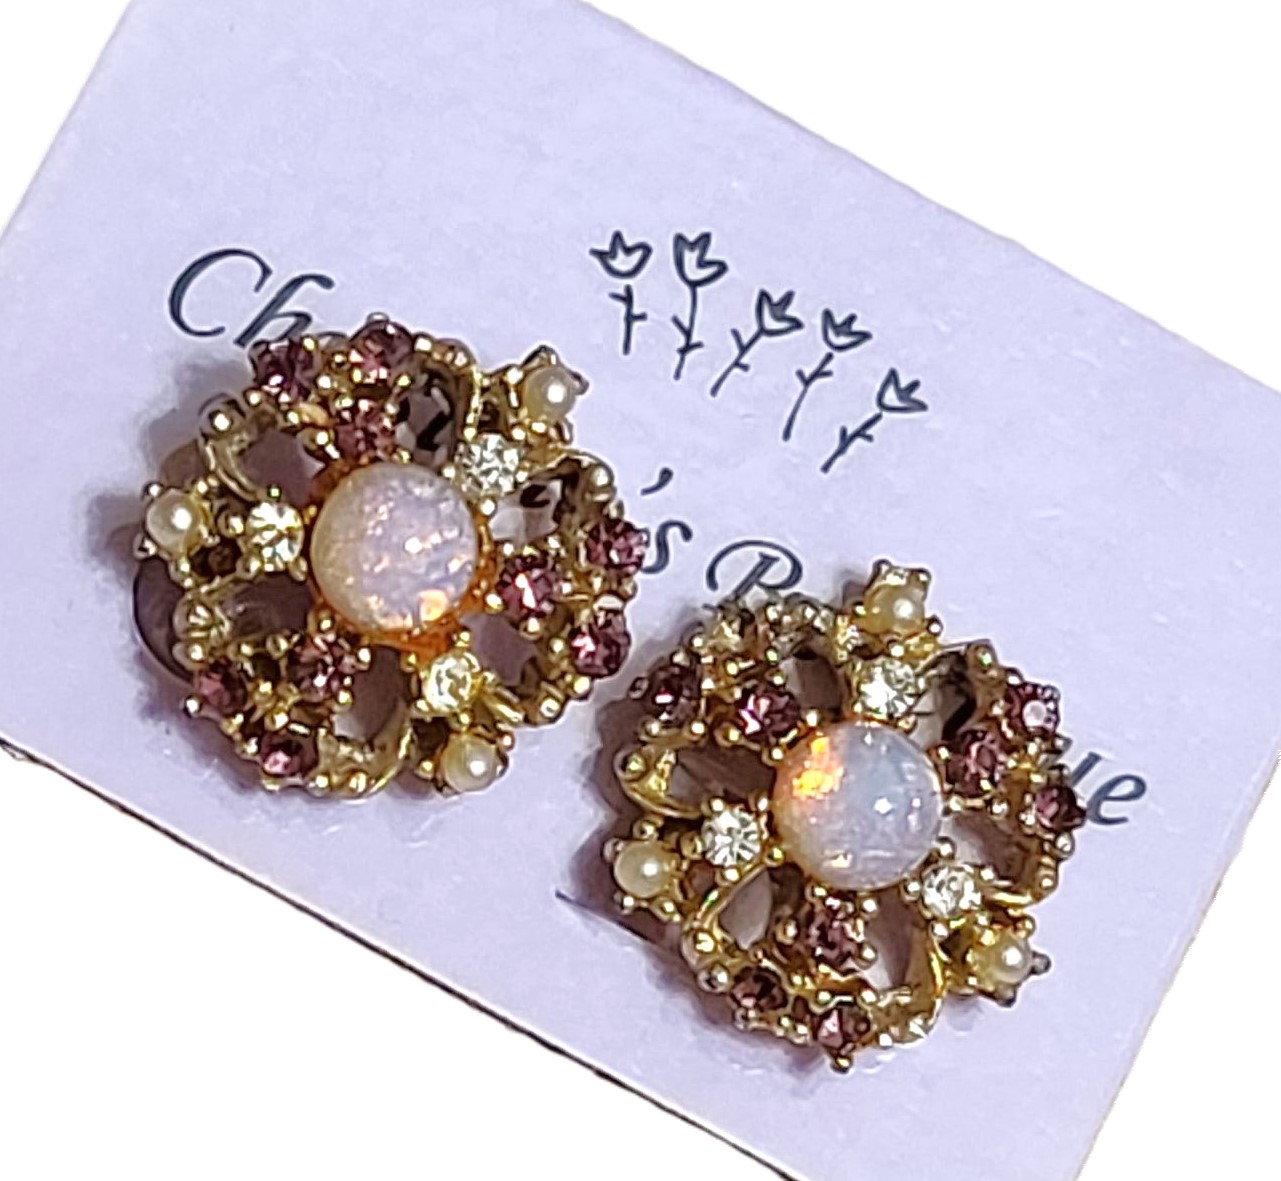 Purple rhinestone earrings with center pink foil cabachon, vintage screw back earrings